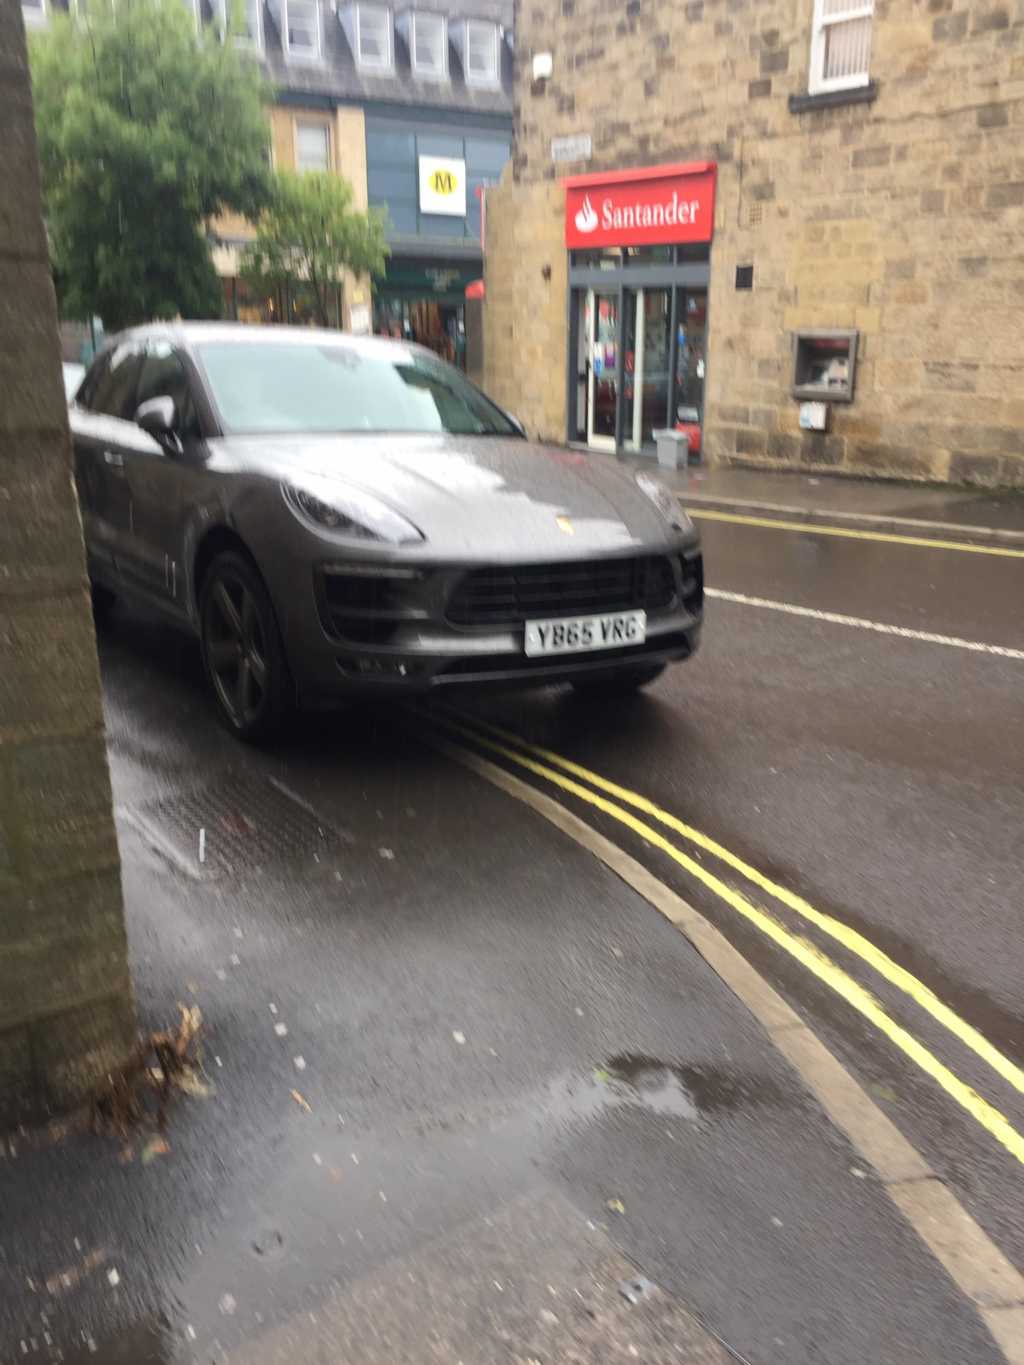 YB65 VRG is a crap parker